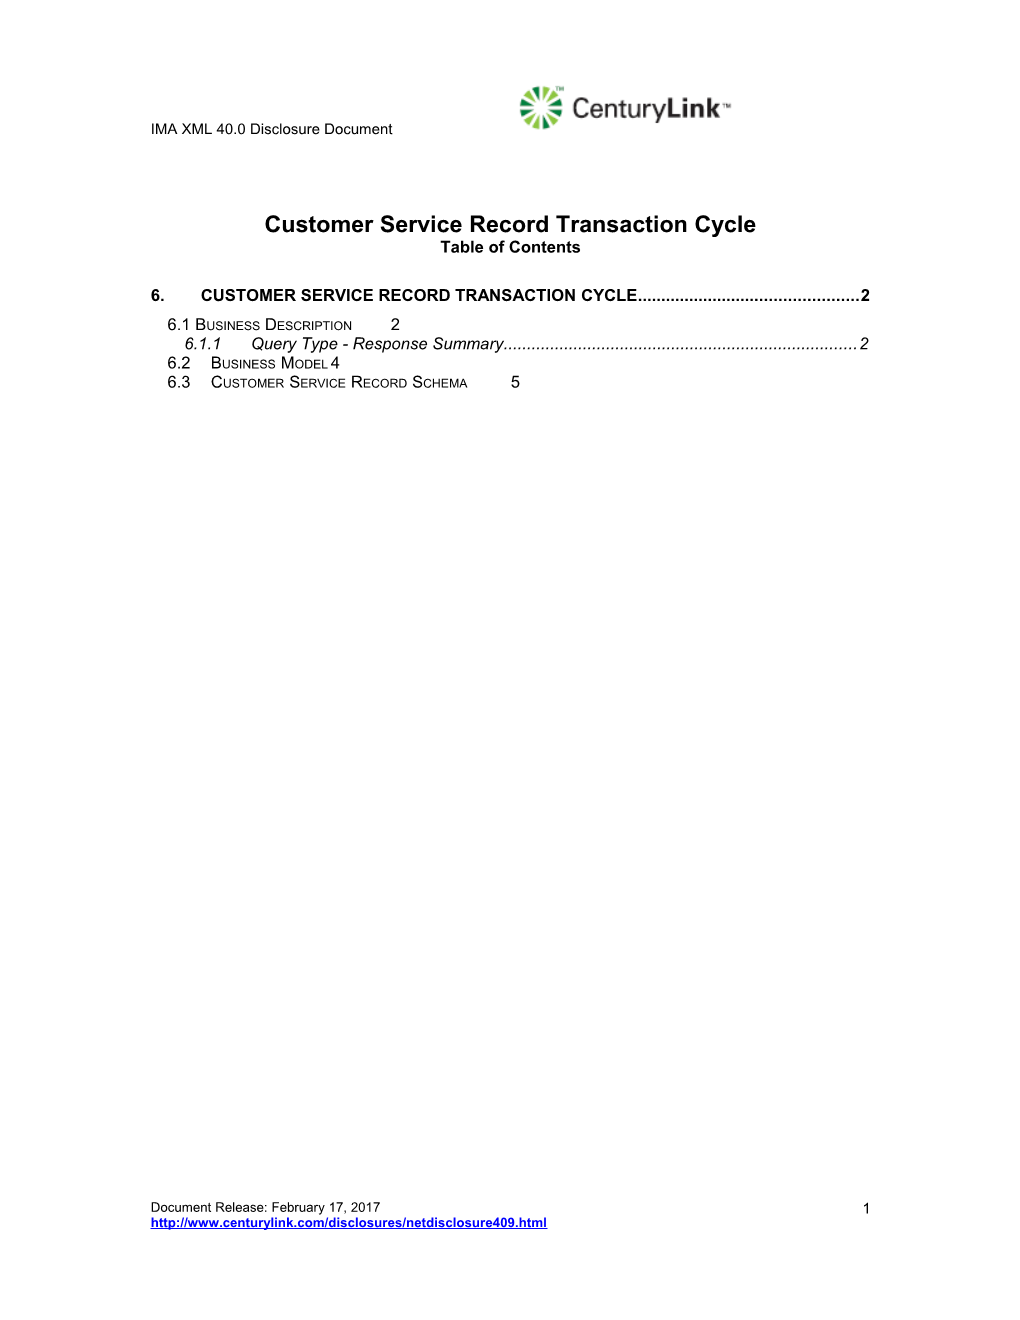 Customer Service Record Transaction Cycle